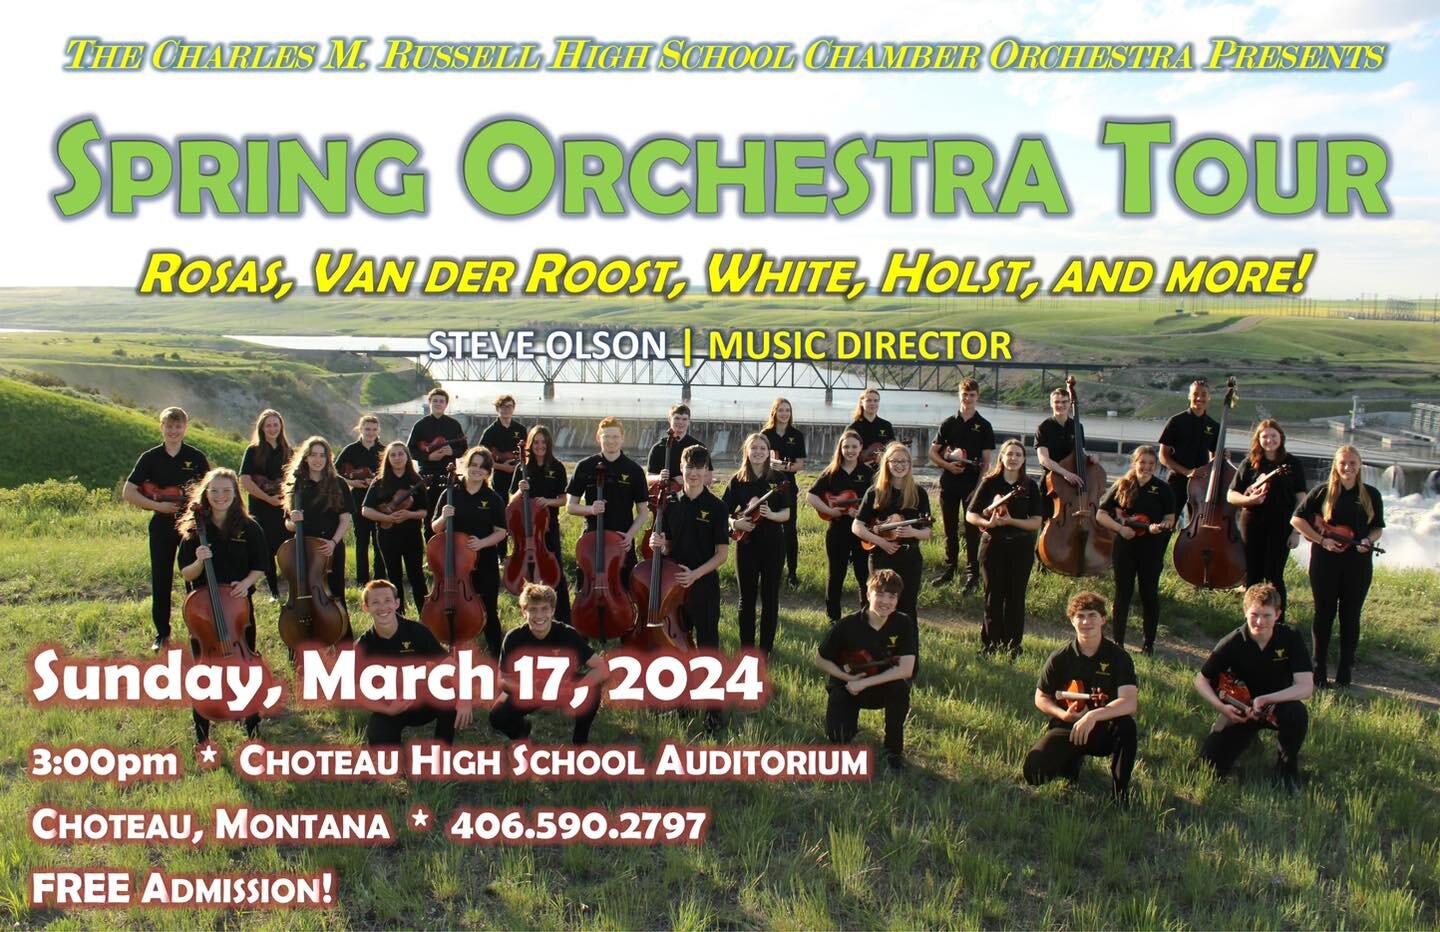 🍀🍀FREE CONCERT TODAY 🍀🍀
Spring Orchestra Tour
See you there!